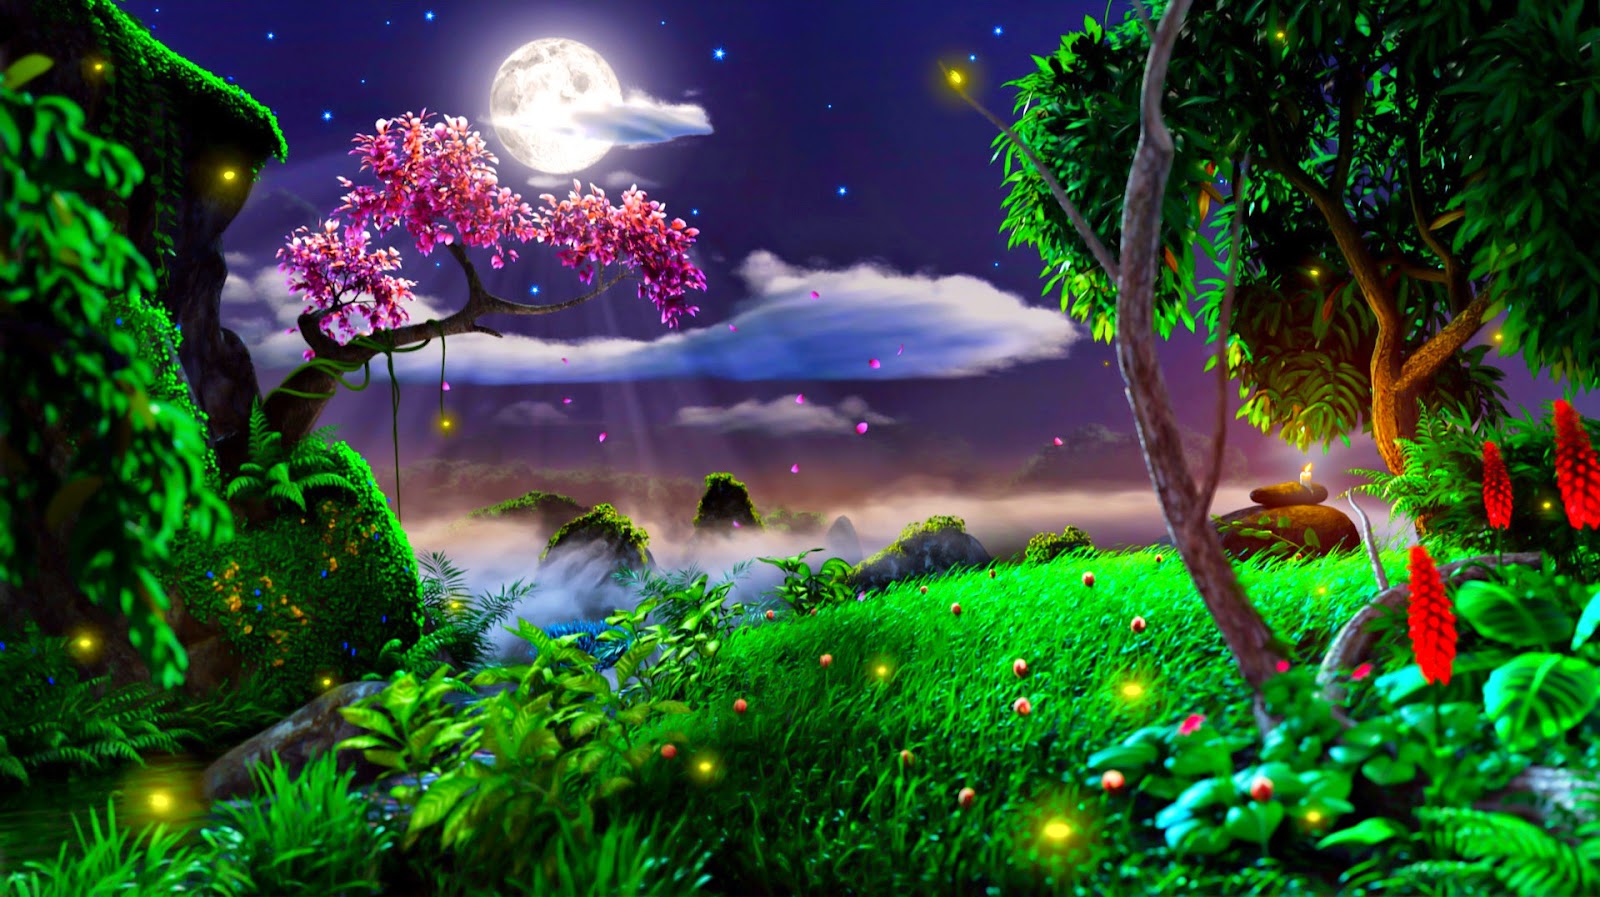 Moon Light And Stars Night Background With Trees Nature Art Image